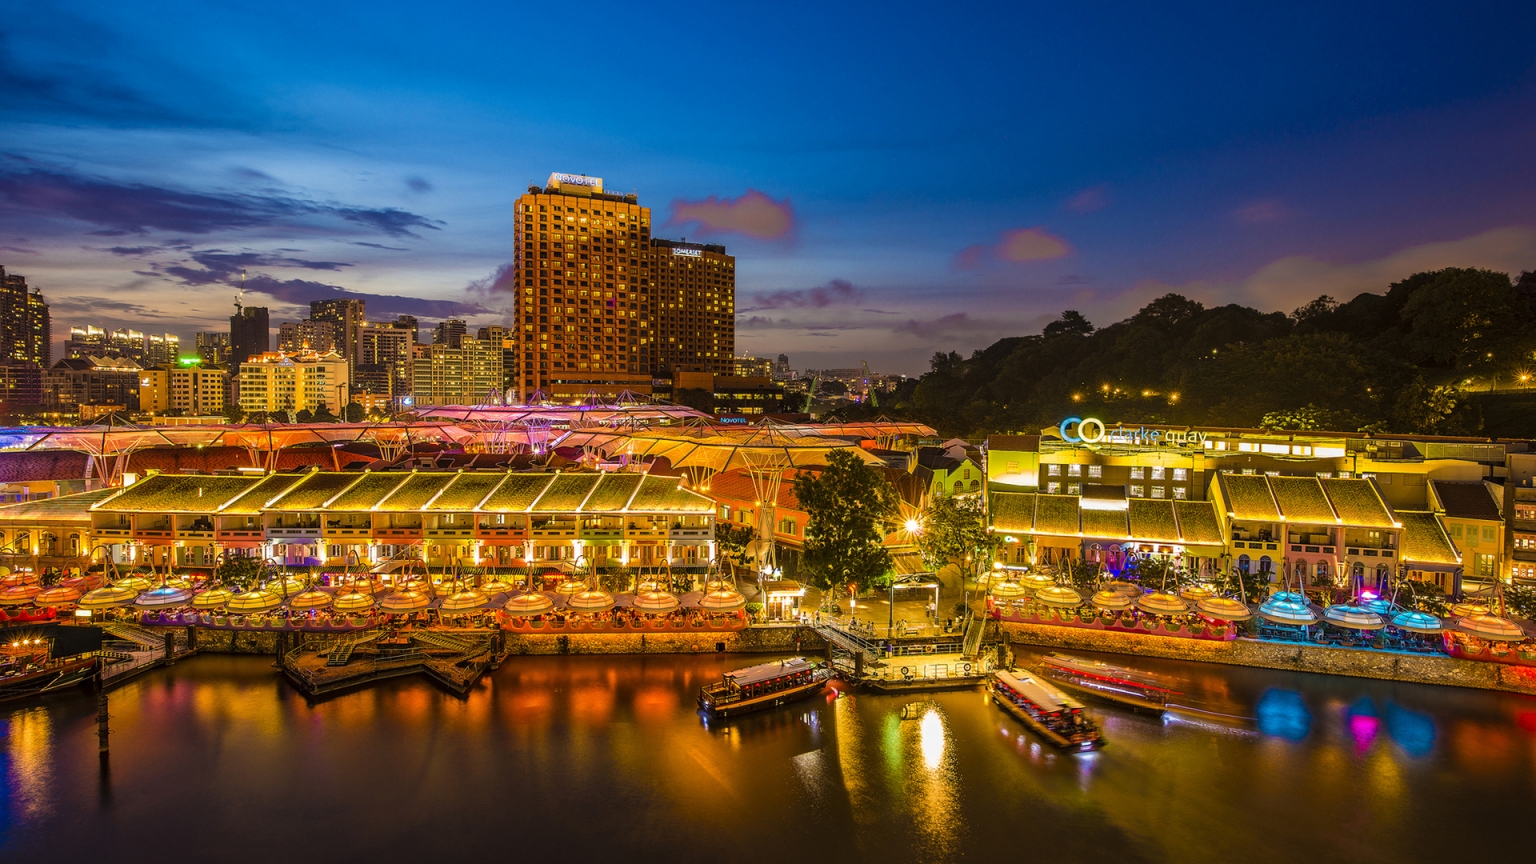 Night in Singapore for 1536 x 864 HDTV resolution